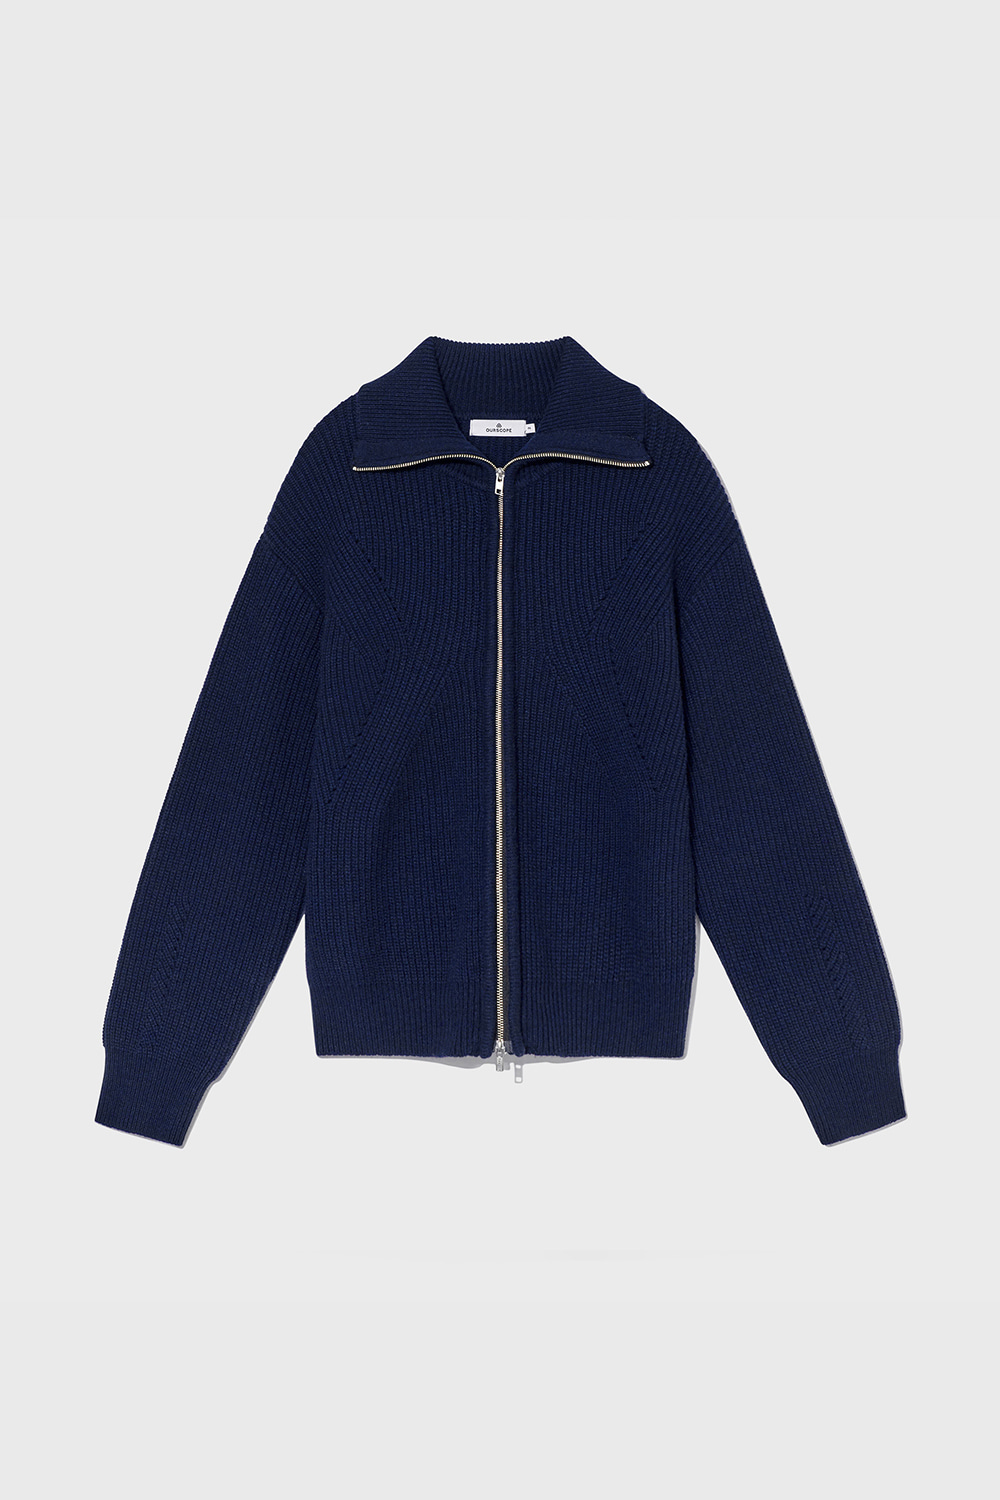 Decal Extra Fine Wool Zip-up Knit (Night Navy)